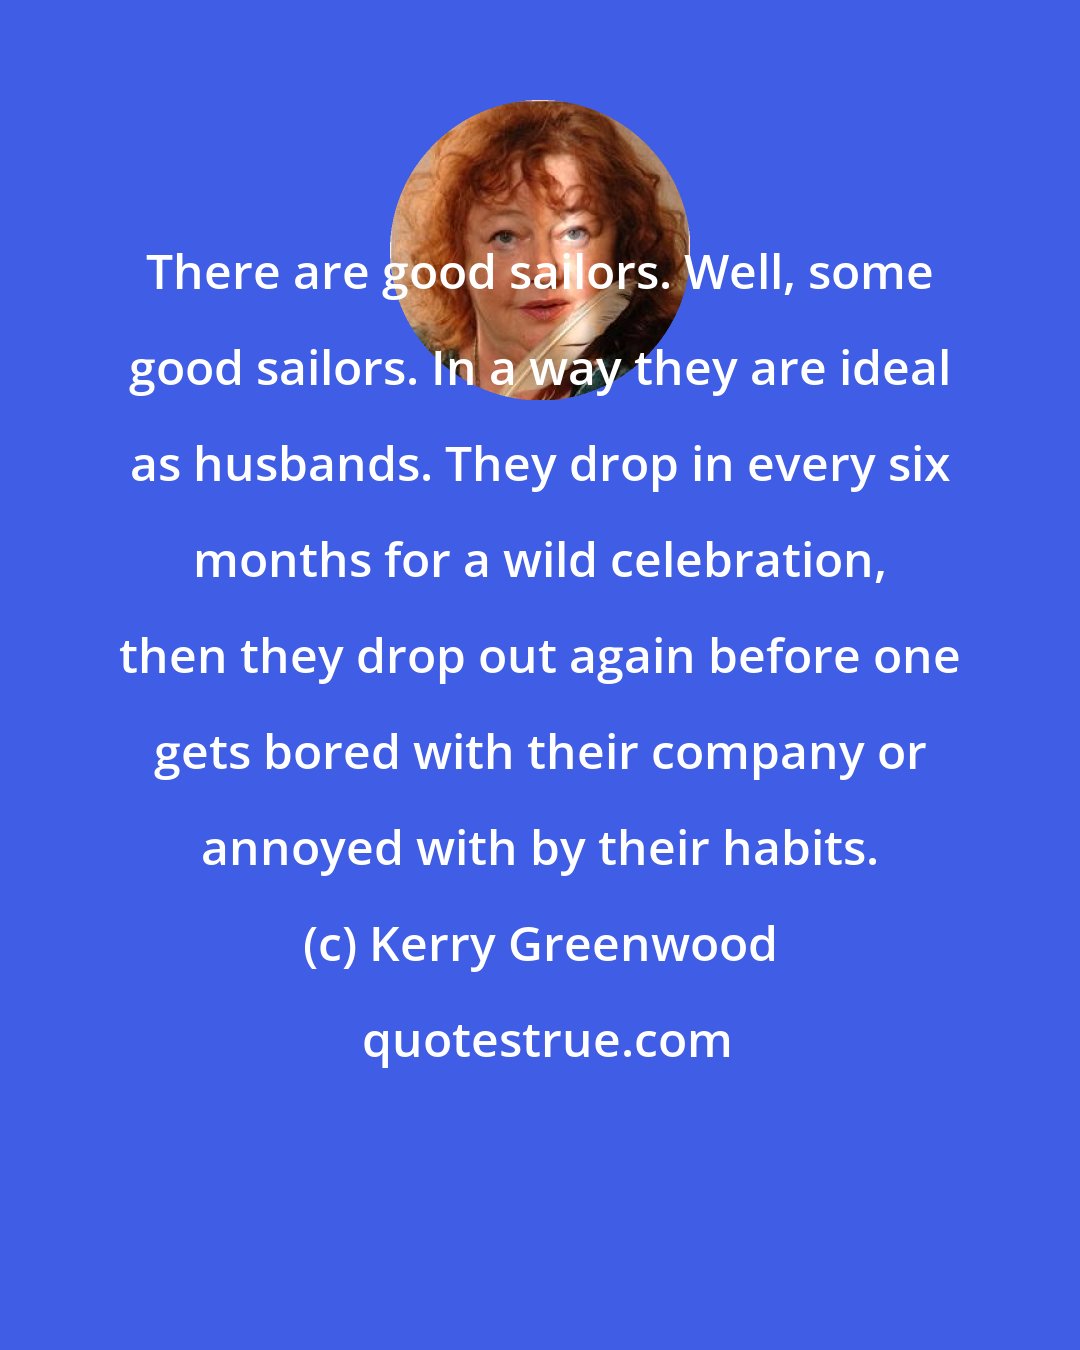 Kerry Greenwood: There are good sailors. Well, some good sailors. In a way they are ideal as husbands. They drop in every six months for a wild celebration, then they drop out again before one gets bored with their company or annoyed with by their habits.